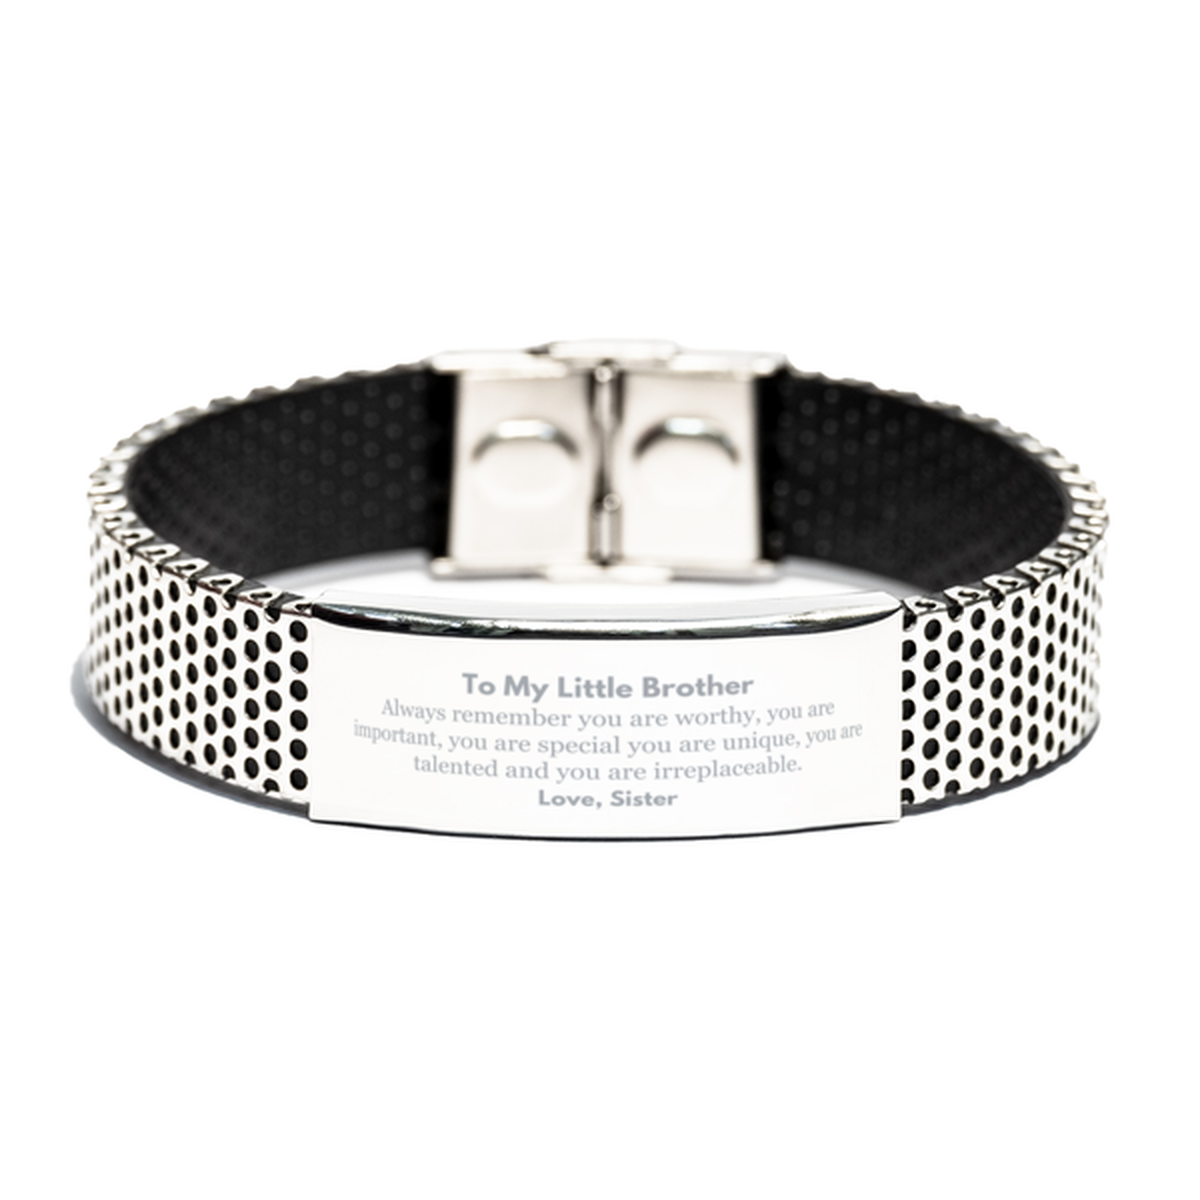 Little Brother Birthday Gifts from Sister, Inspirational Stainless Steel Bracelet for Little Brother Christmas Graduation Gifts for Little Brother Always remember you are worthy, you are important. Love, Sister